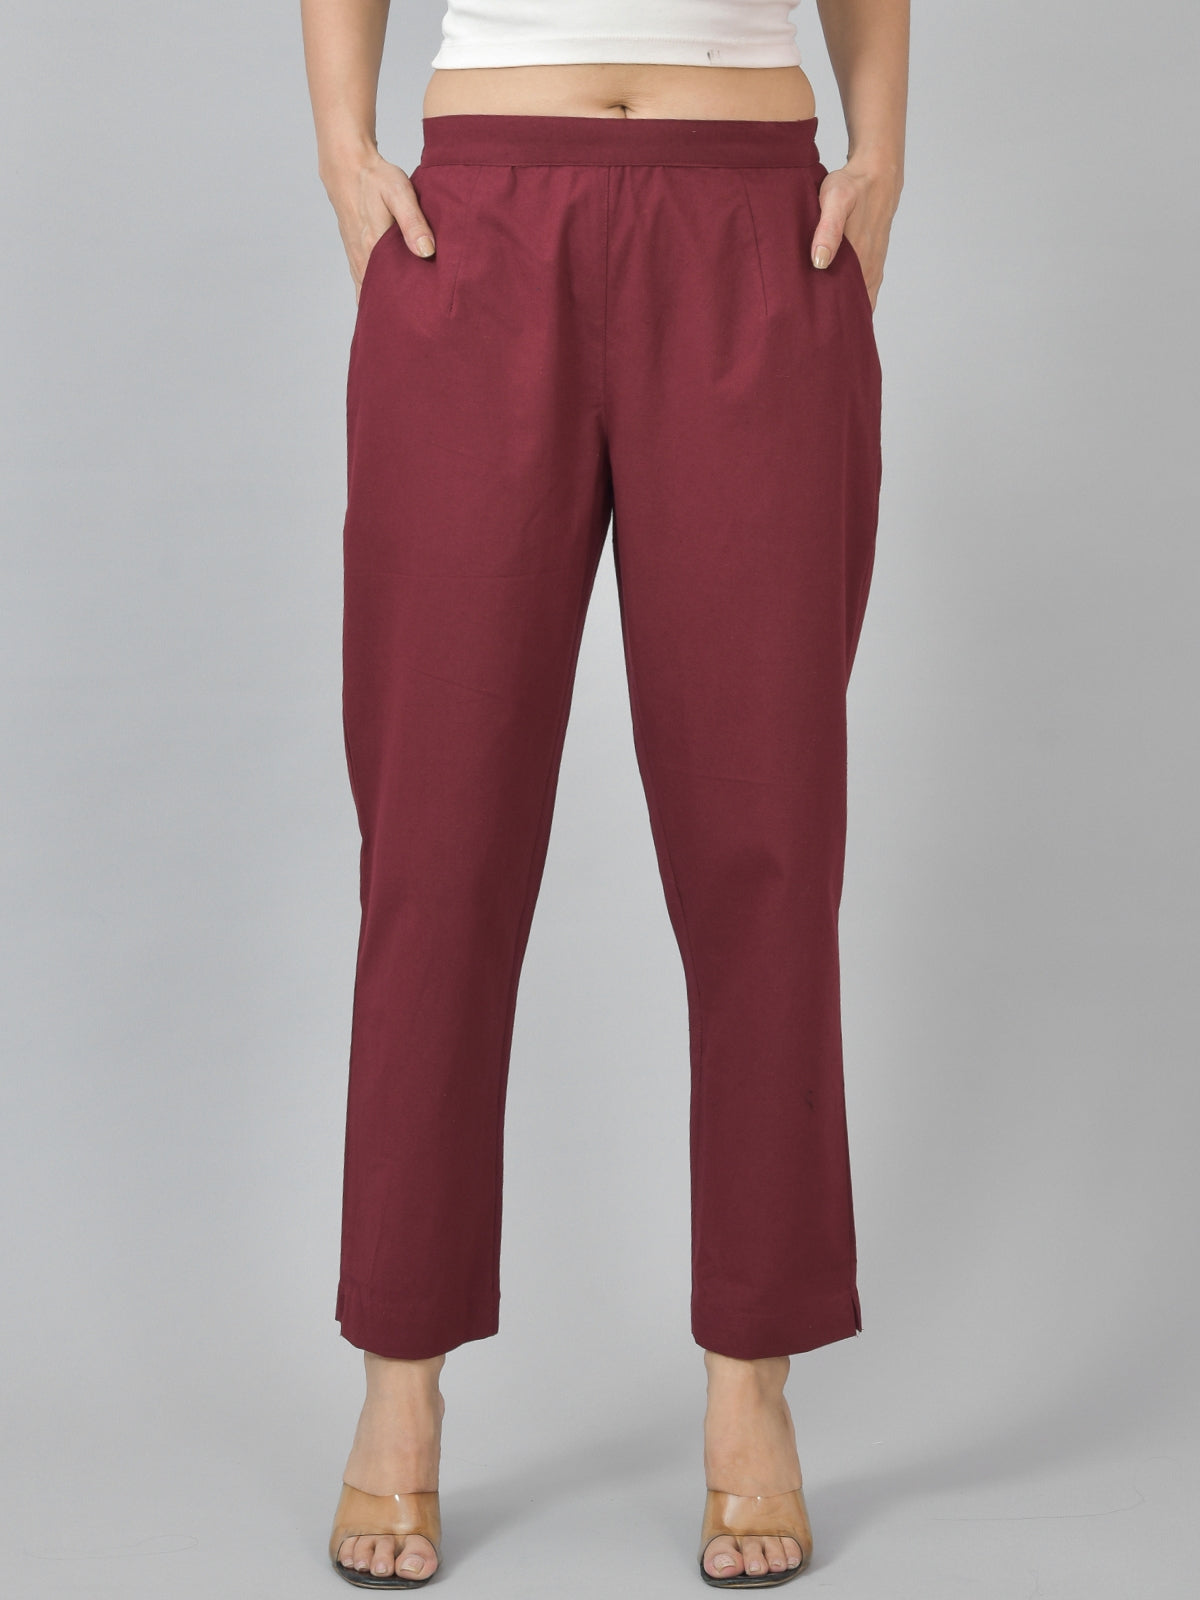 Pack Of 2 Womens Half Elastic Maroon And White Deep Pocket Cotton Pants